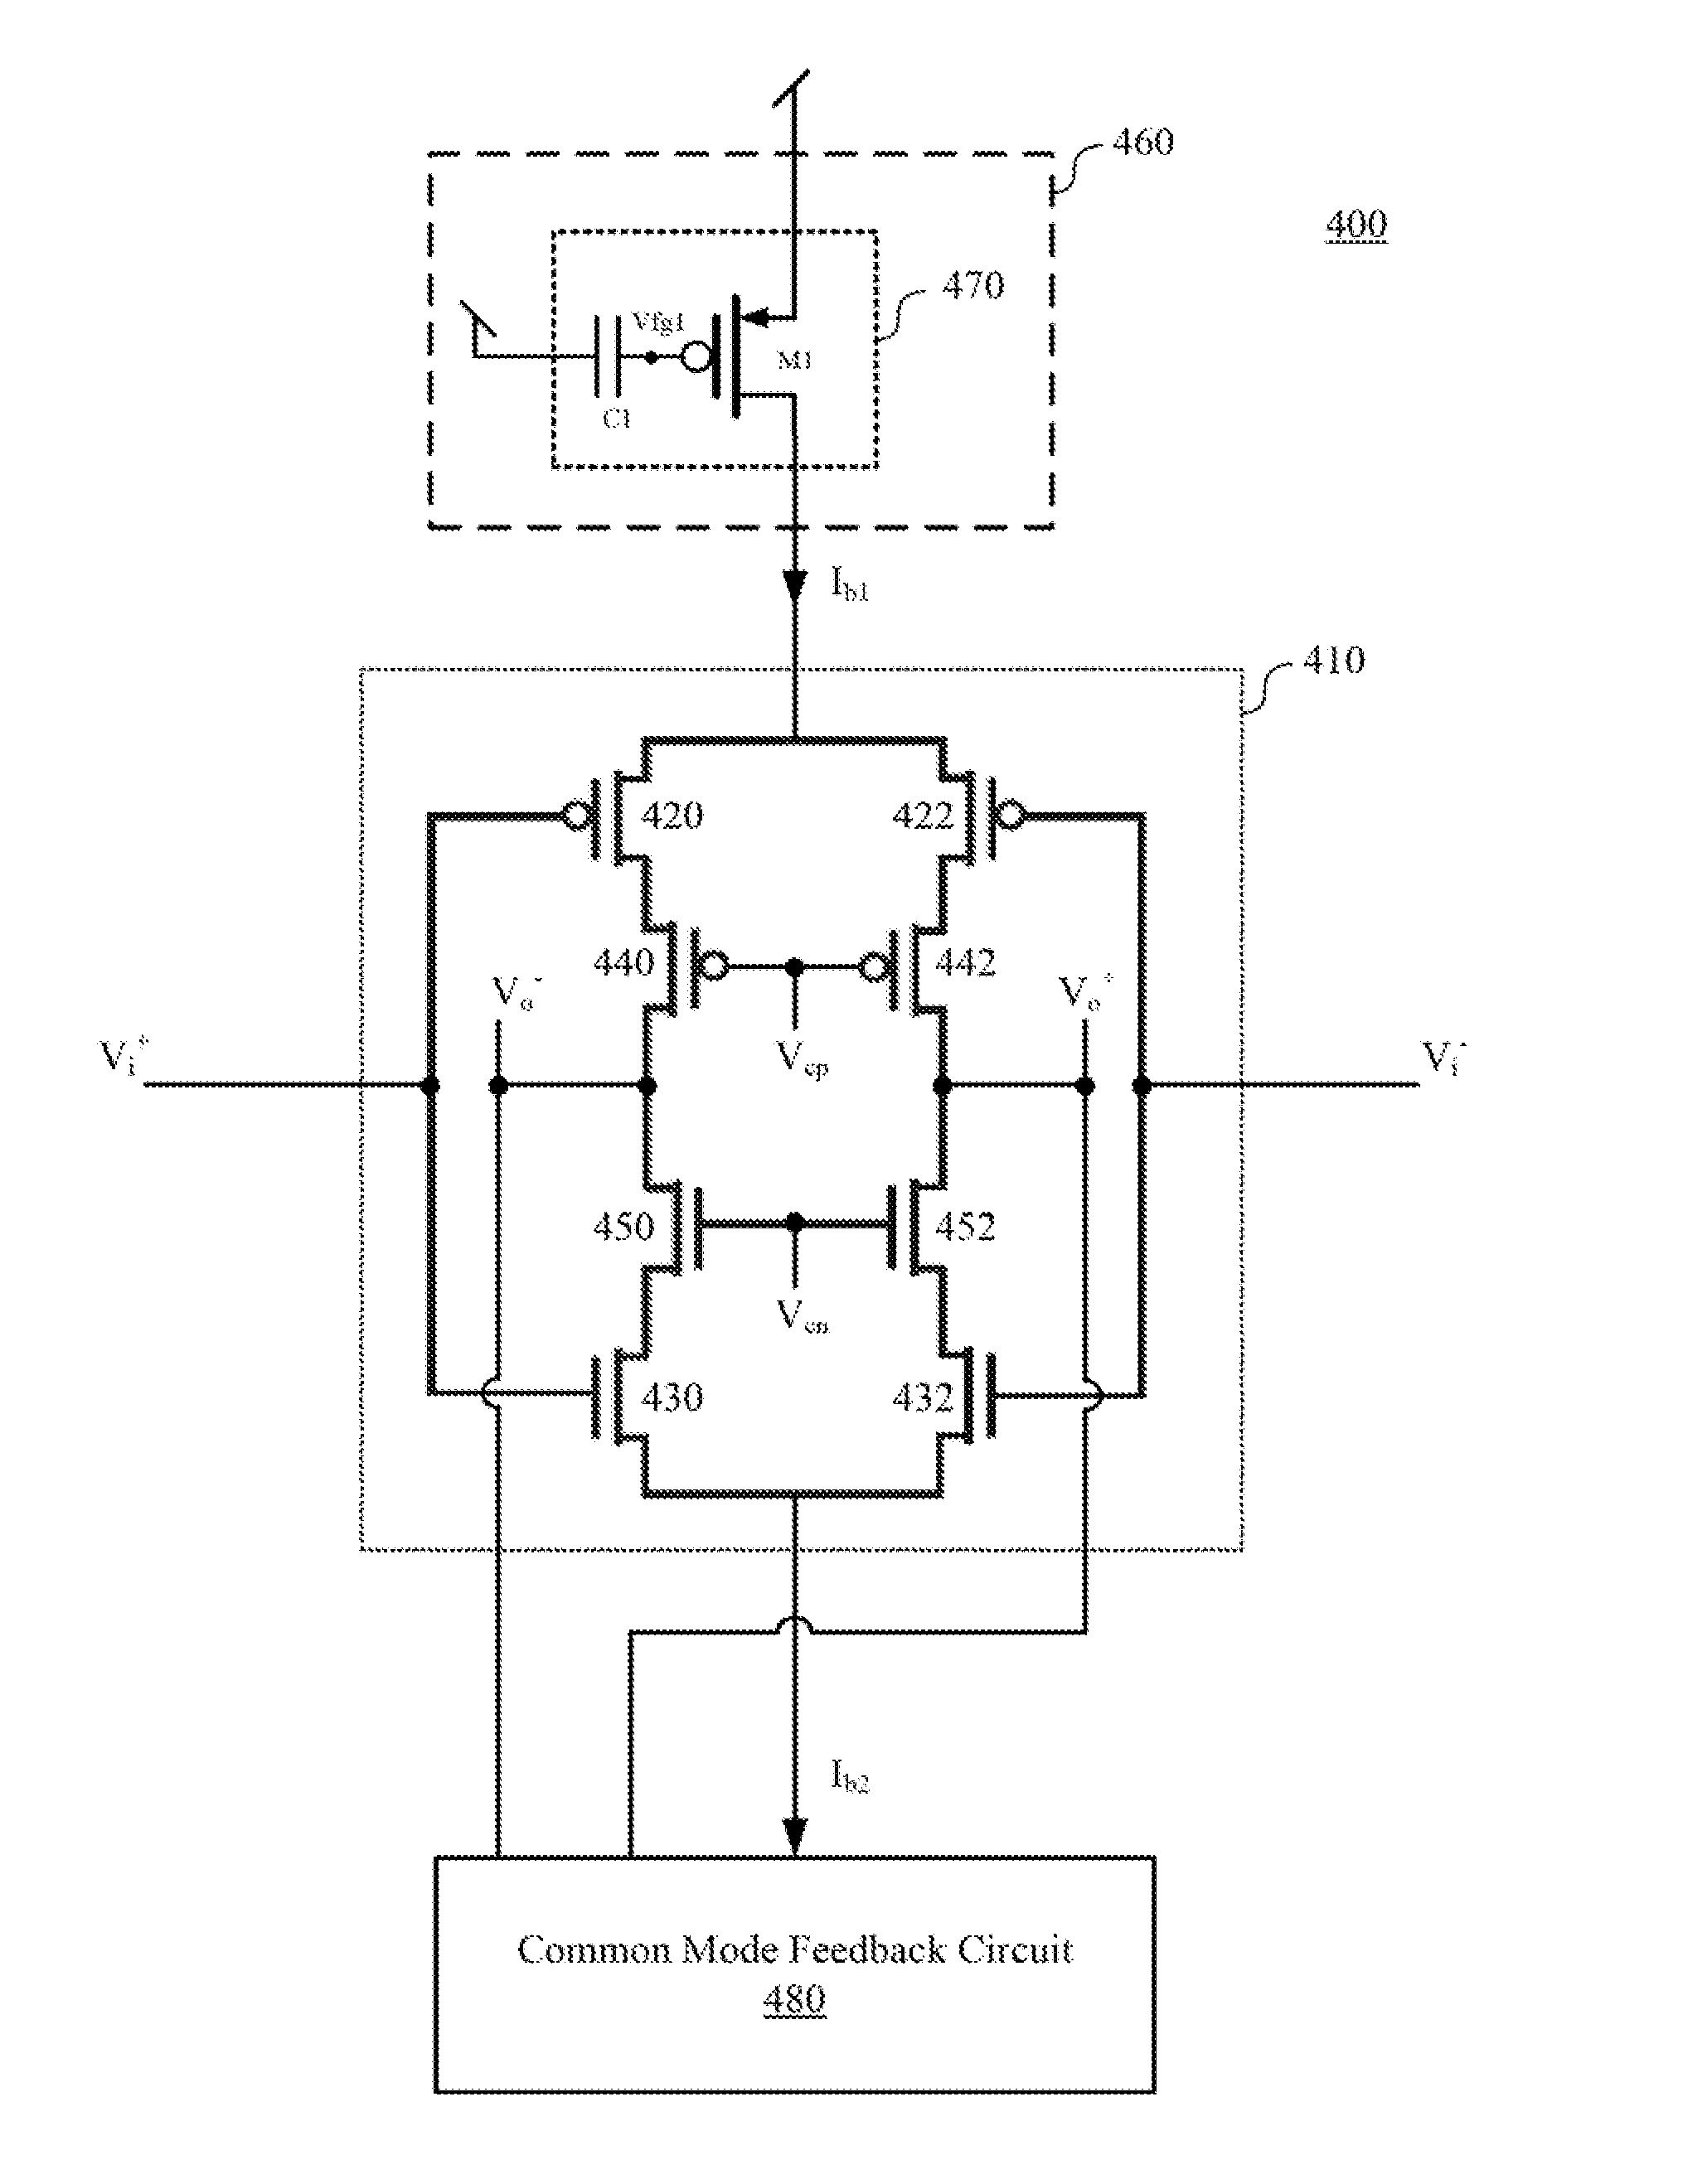 Operational transconductance amplifier, reconfigurable fully differential voltage sensing amplifier and reconfigurable fully differential capacitive sensing amplifier